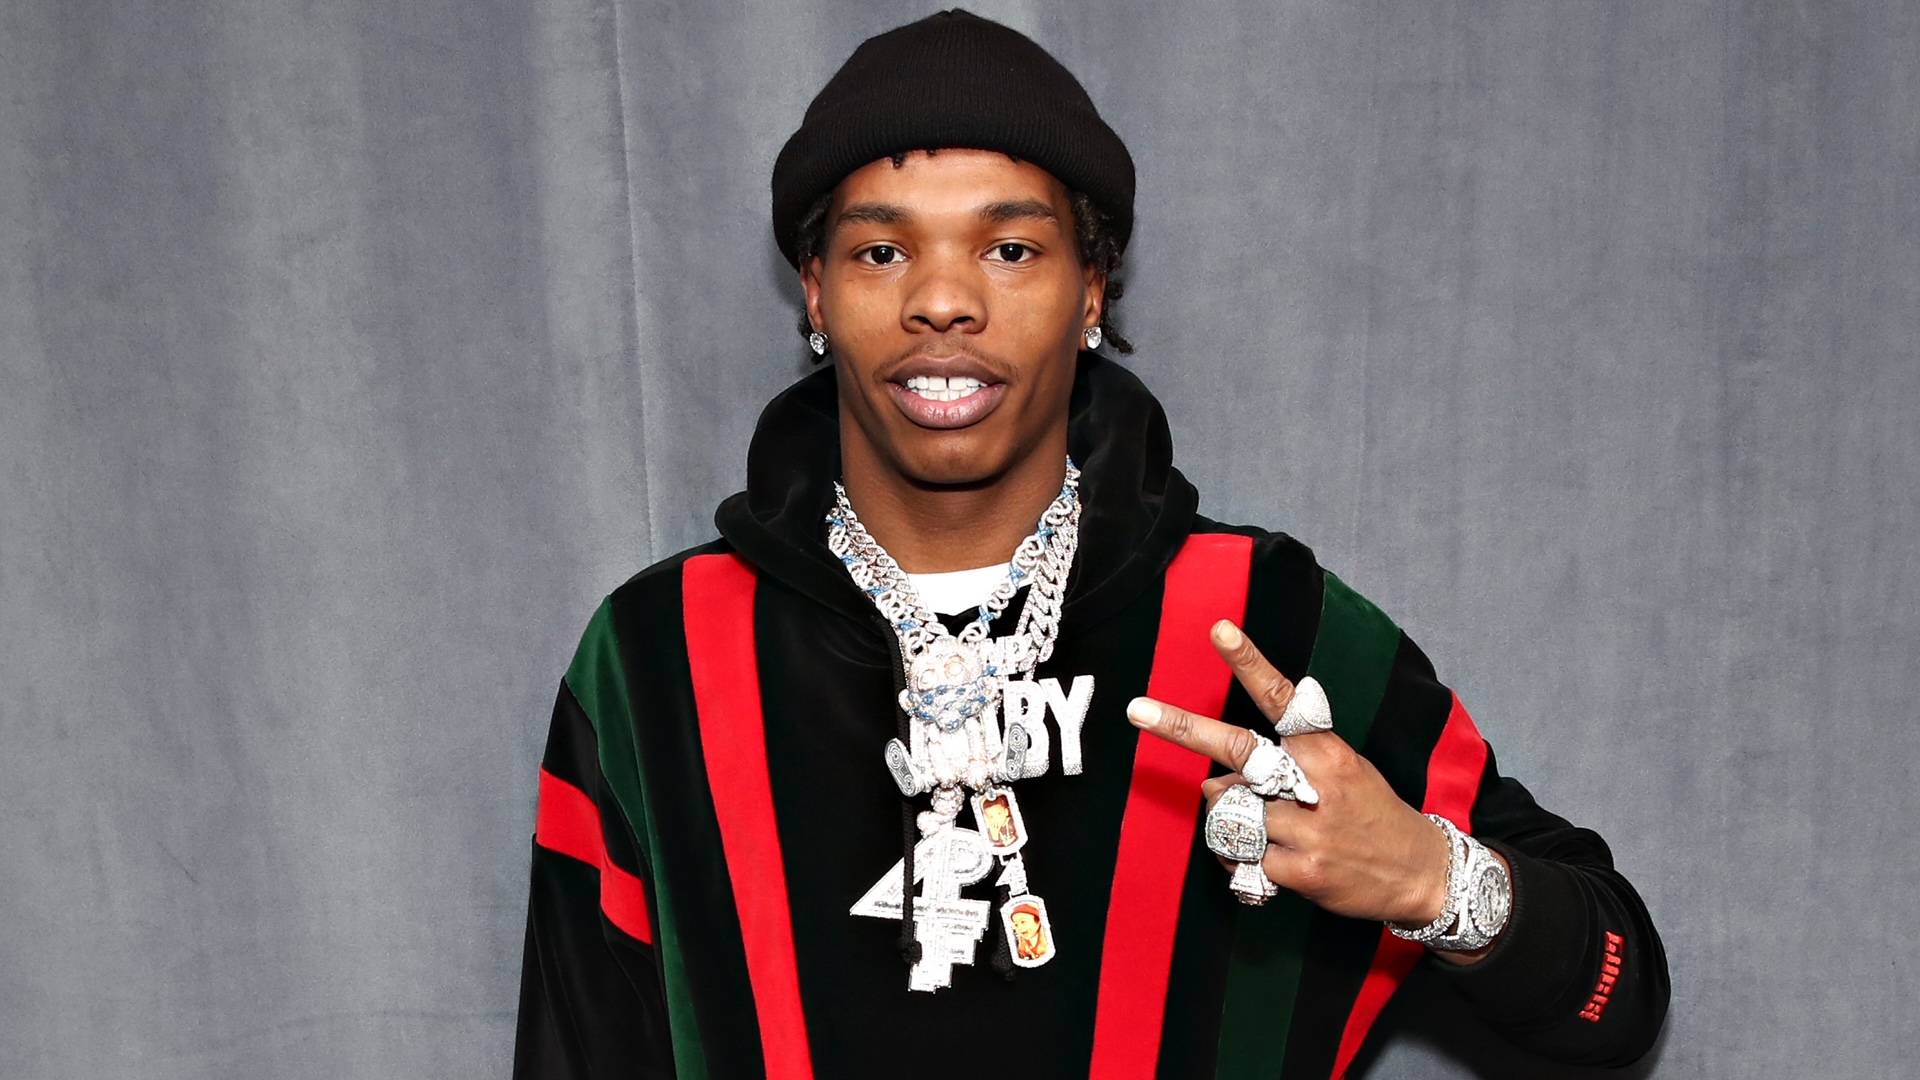 Lil Baby on BET Buzz 2020.